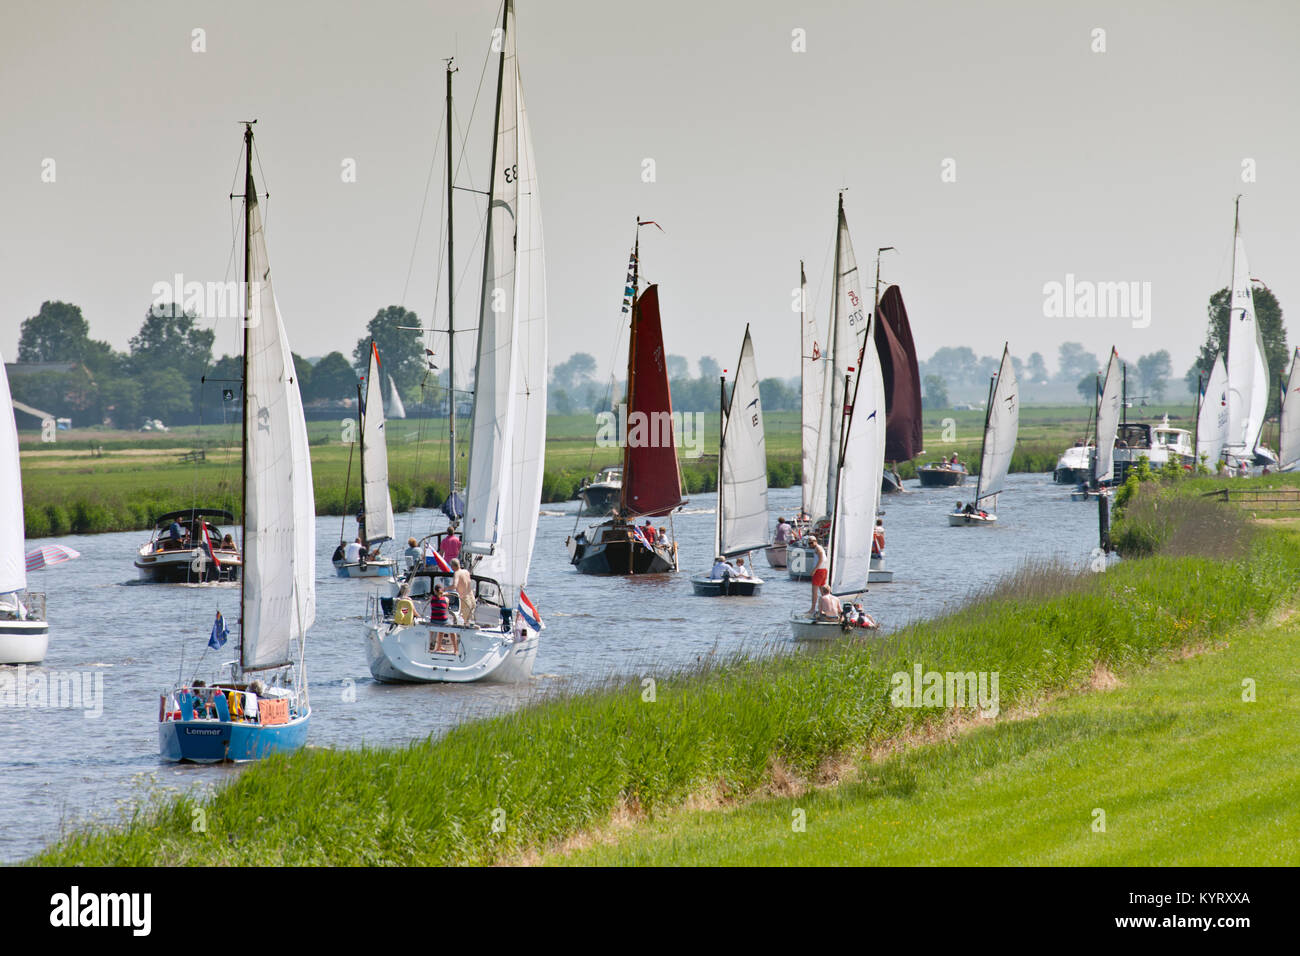 The Netherlands, Hommerts, Sailing boats in canal called Jeltesloot. Stock Photo